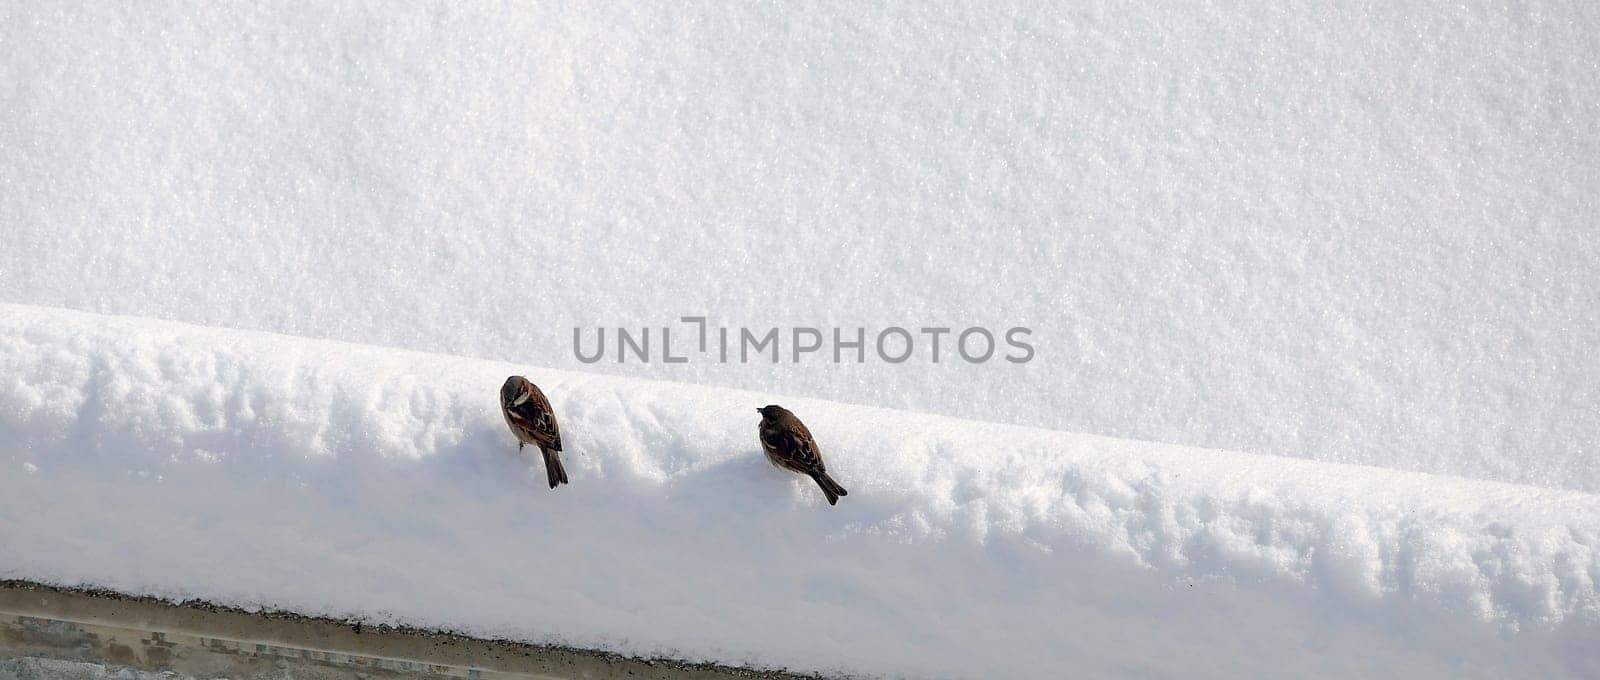 Sparrows collecting and feeding forage in winter conditions, sparrow birds in natural life, sparrows looking for food under the snow on a winter day, by nhatipoglu